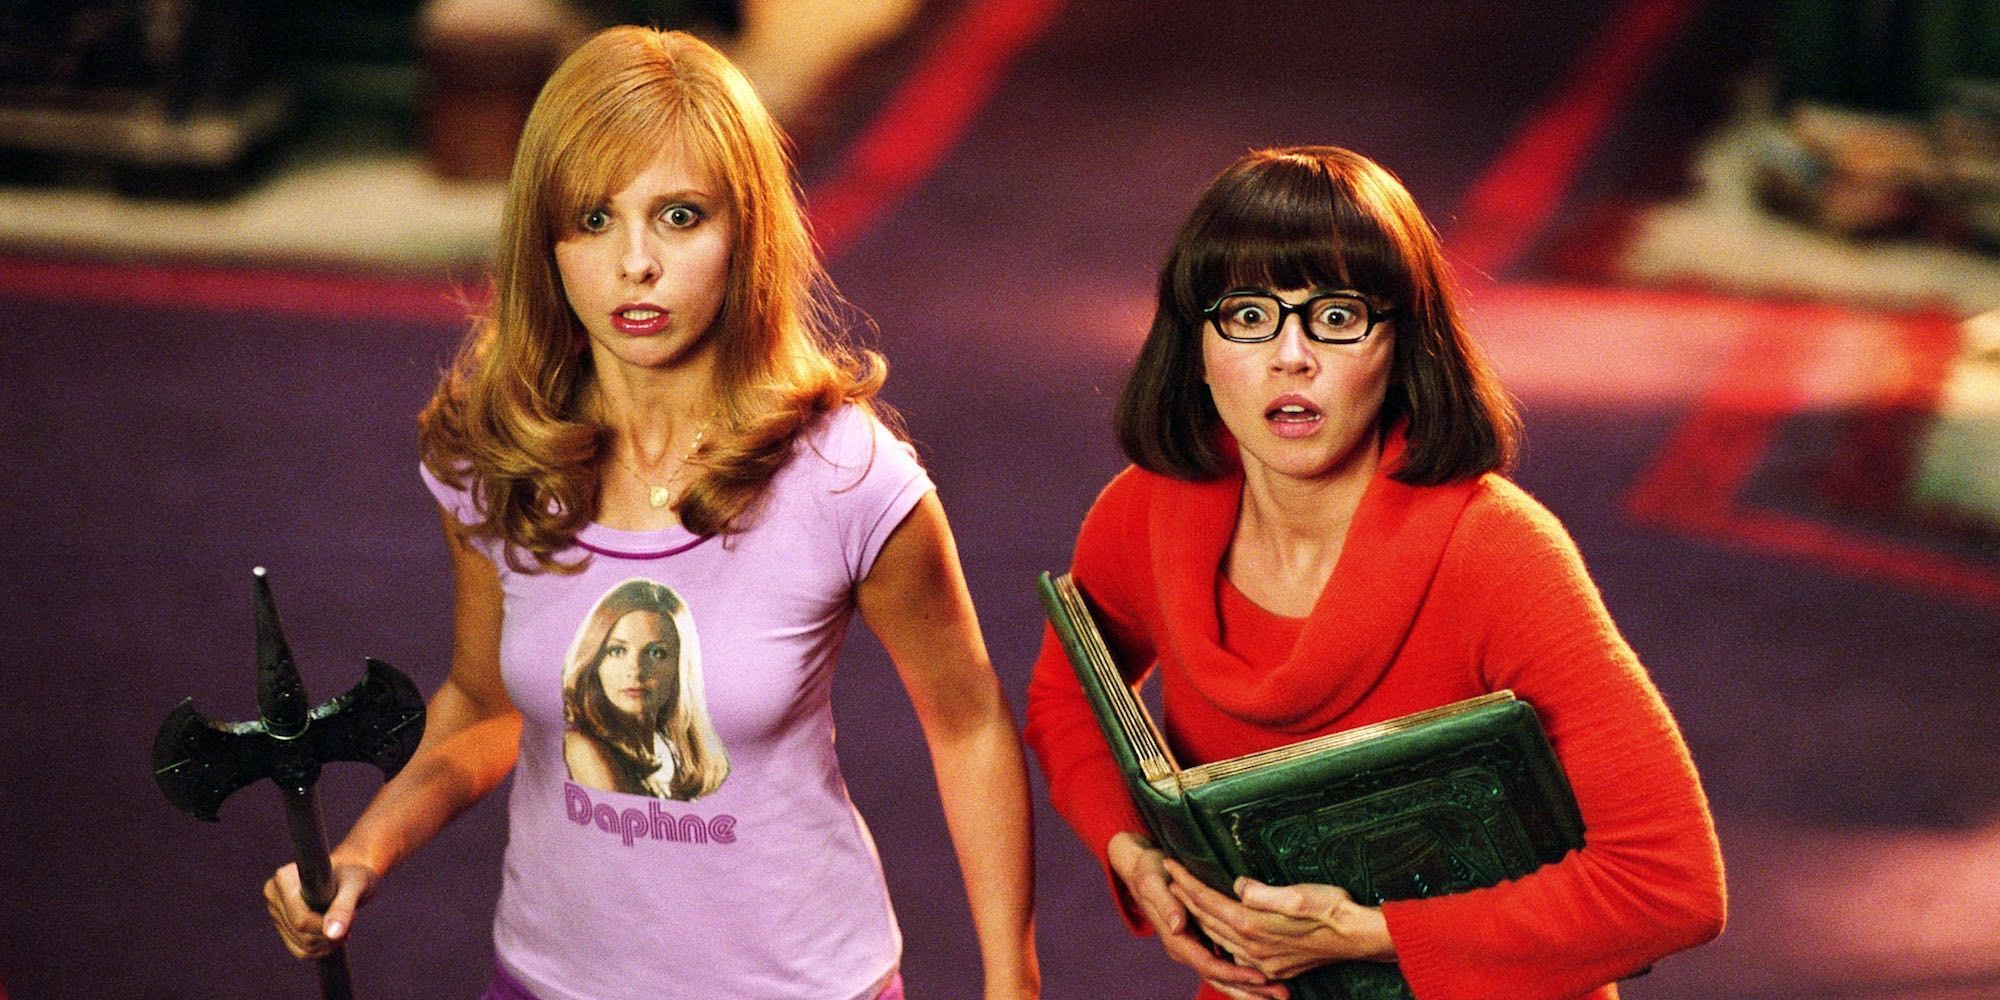 Sarah Michelle Gellar and Linda Cardellini as Daphne and Velma in Scooby Doo